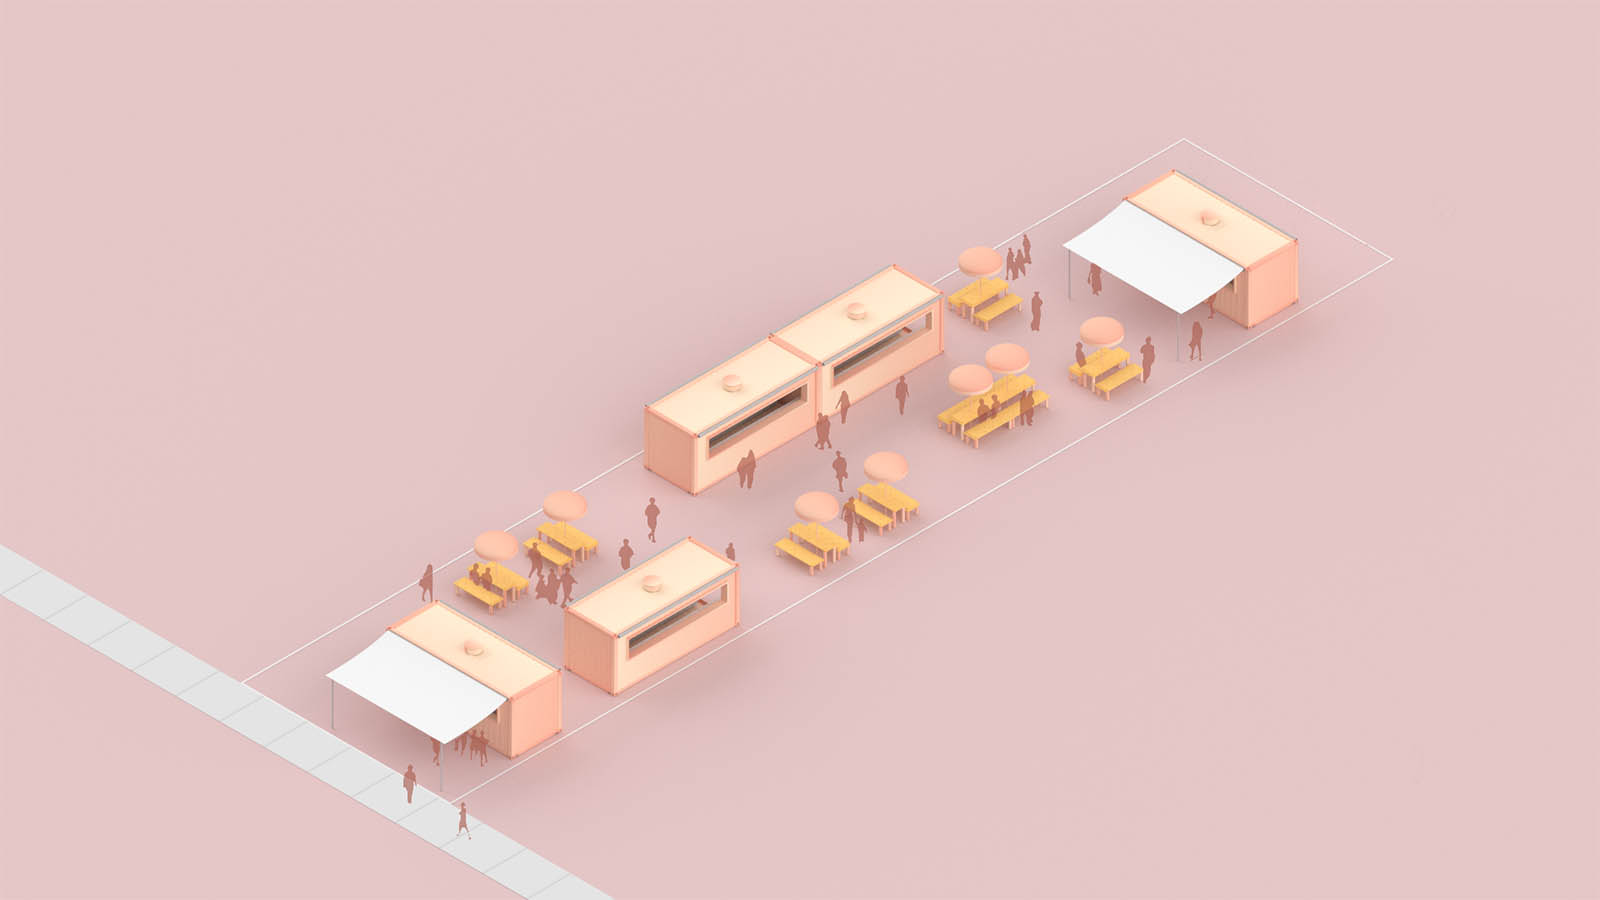 visualization of five buildings and seven outdoor tables with umbrellas